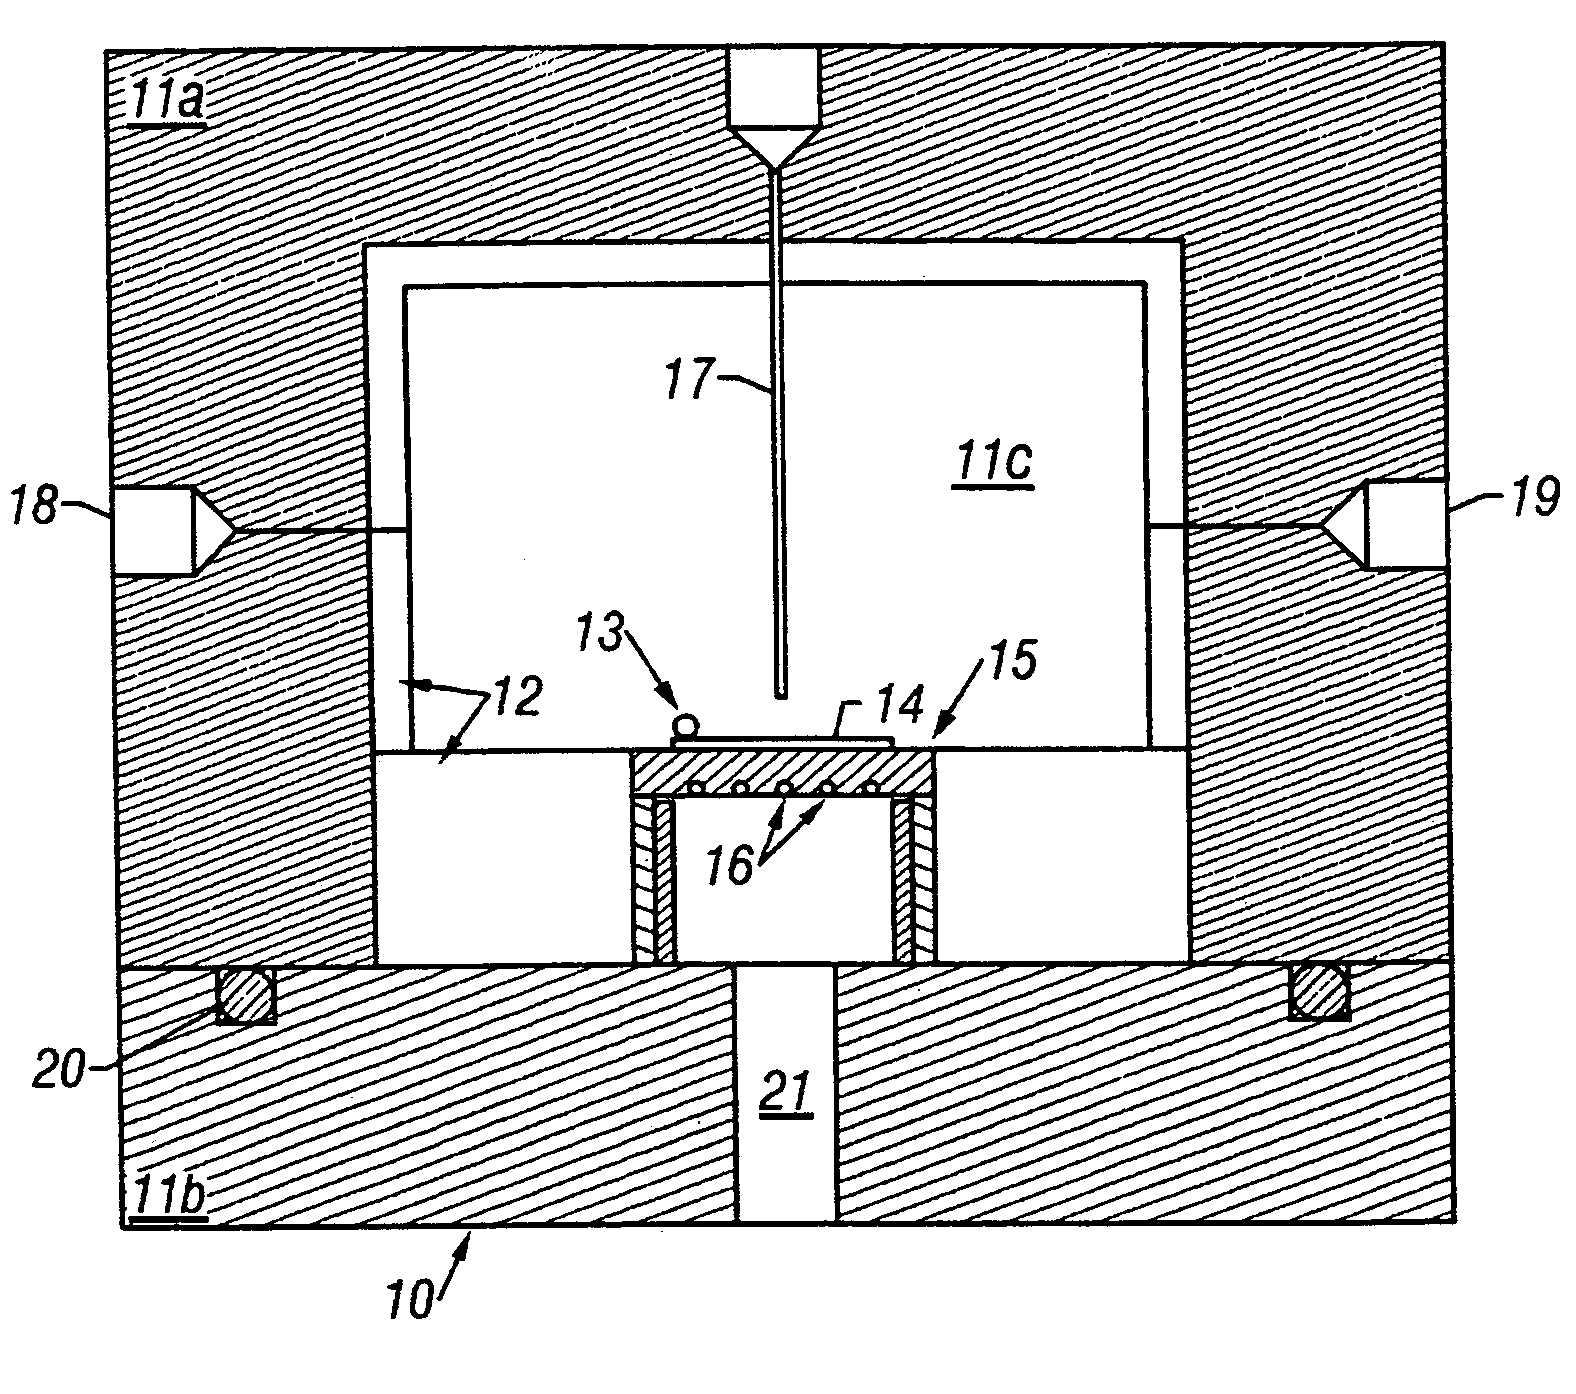 Chemical fluid deposition for the formation of metal and metal alloy films on patterned and unpatterned substrates